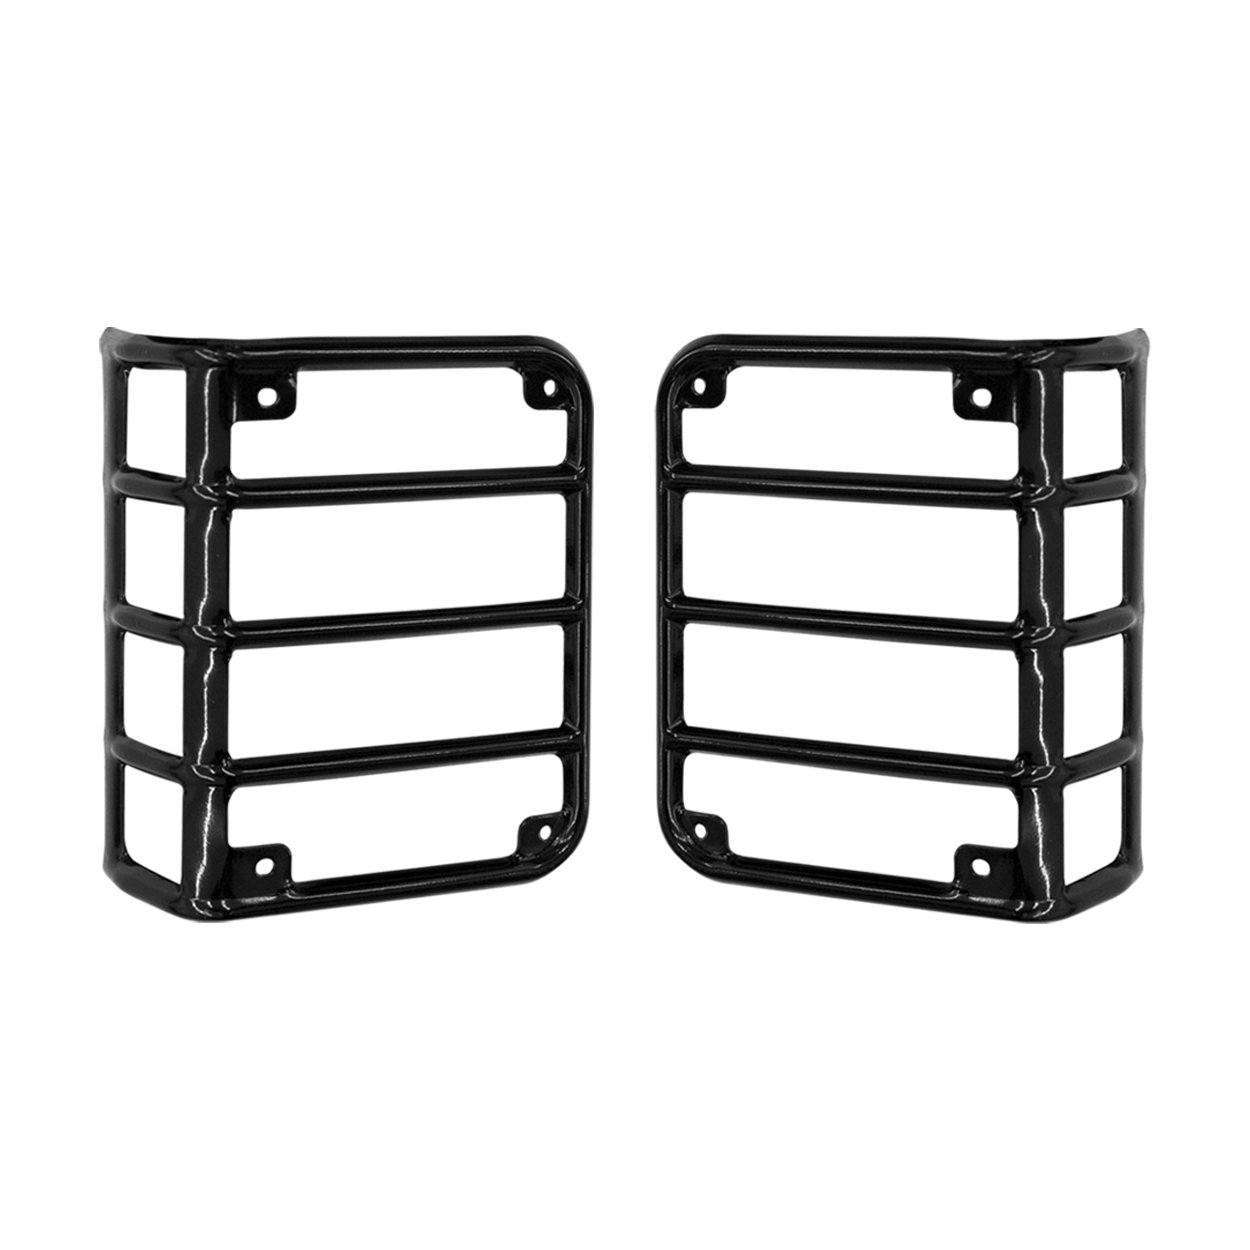 Black Euro Tail Light Covers for 11-18 Jeep Wrangler JK/ JKU High Country  Off-road